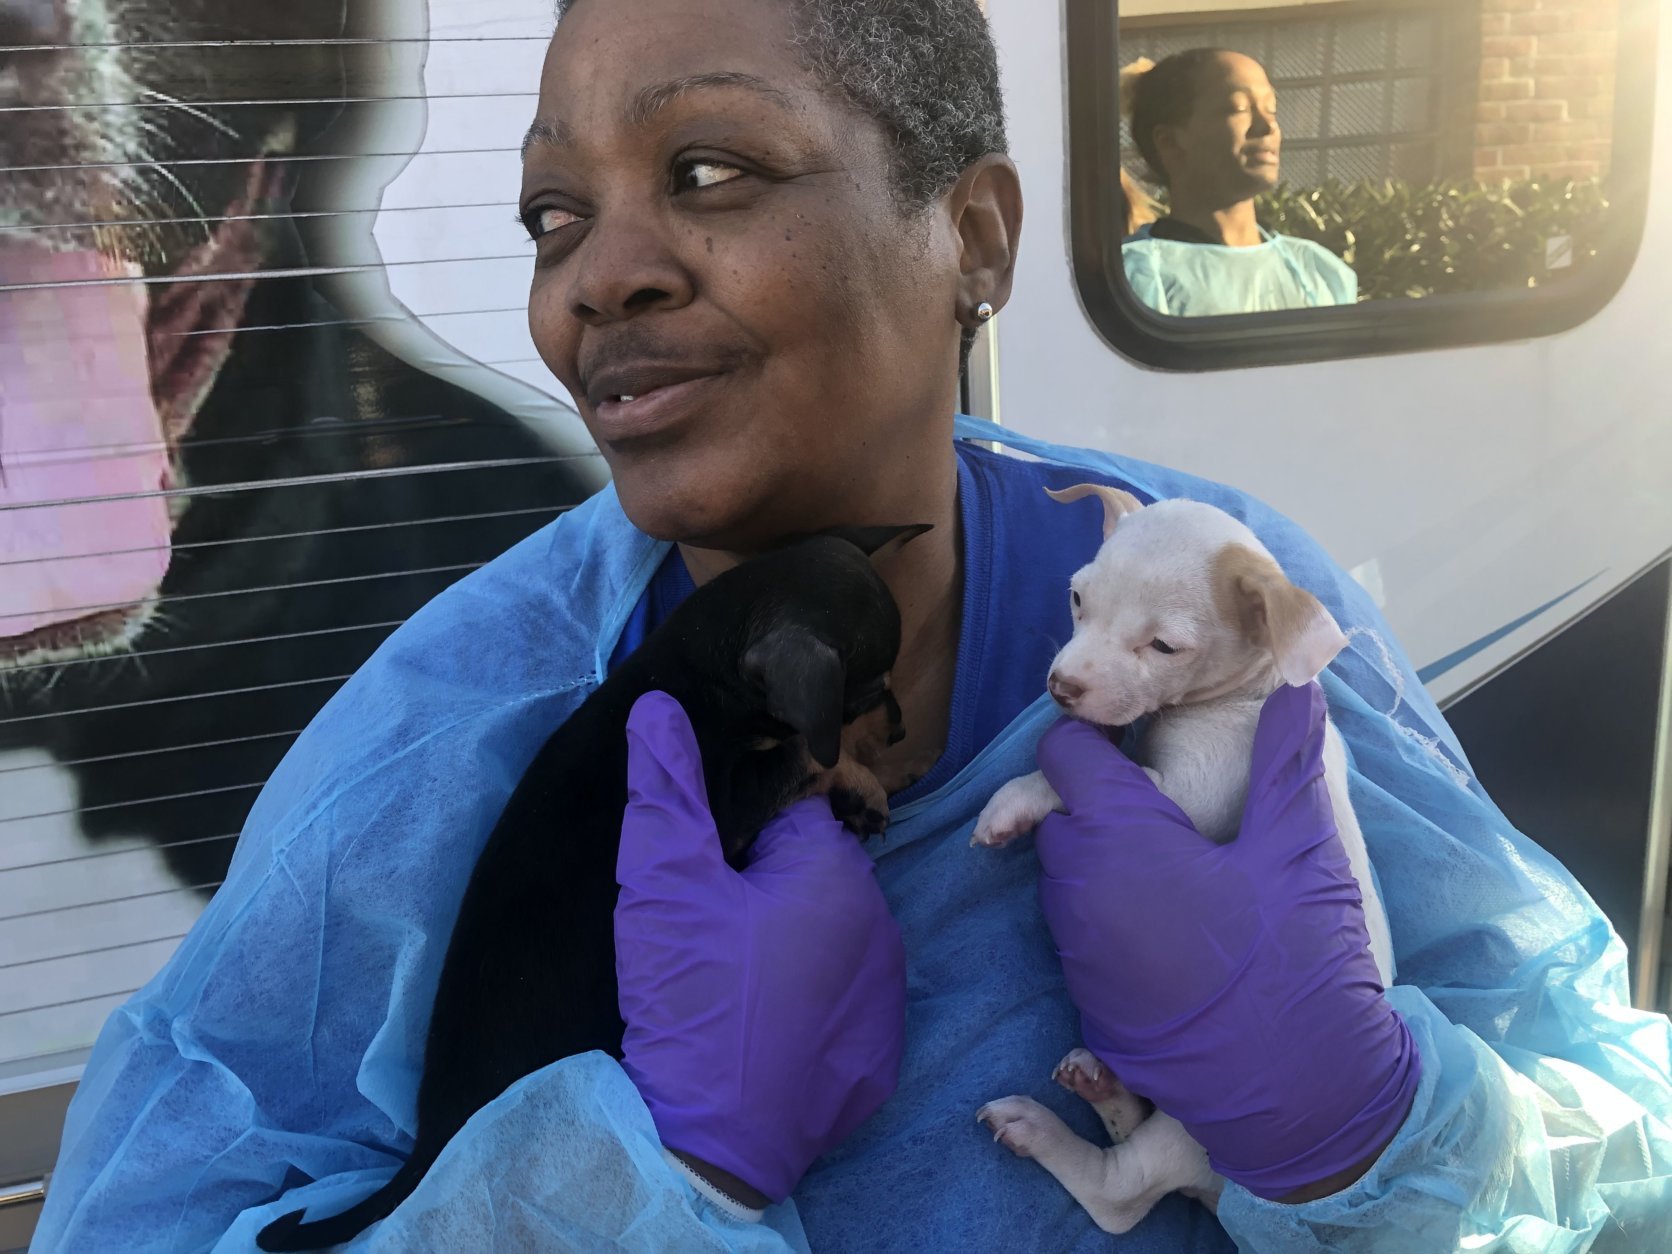 Around 60 of the rescued animals were brought to the D.C. area. Close to 30 dogs rescued from the breeder’s home were also delivered to Loudoun County Animal Services. (WTOP/Mike Murillo)